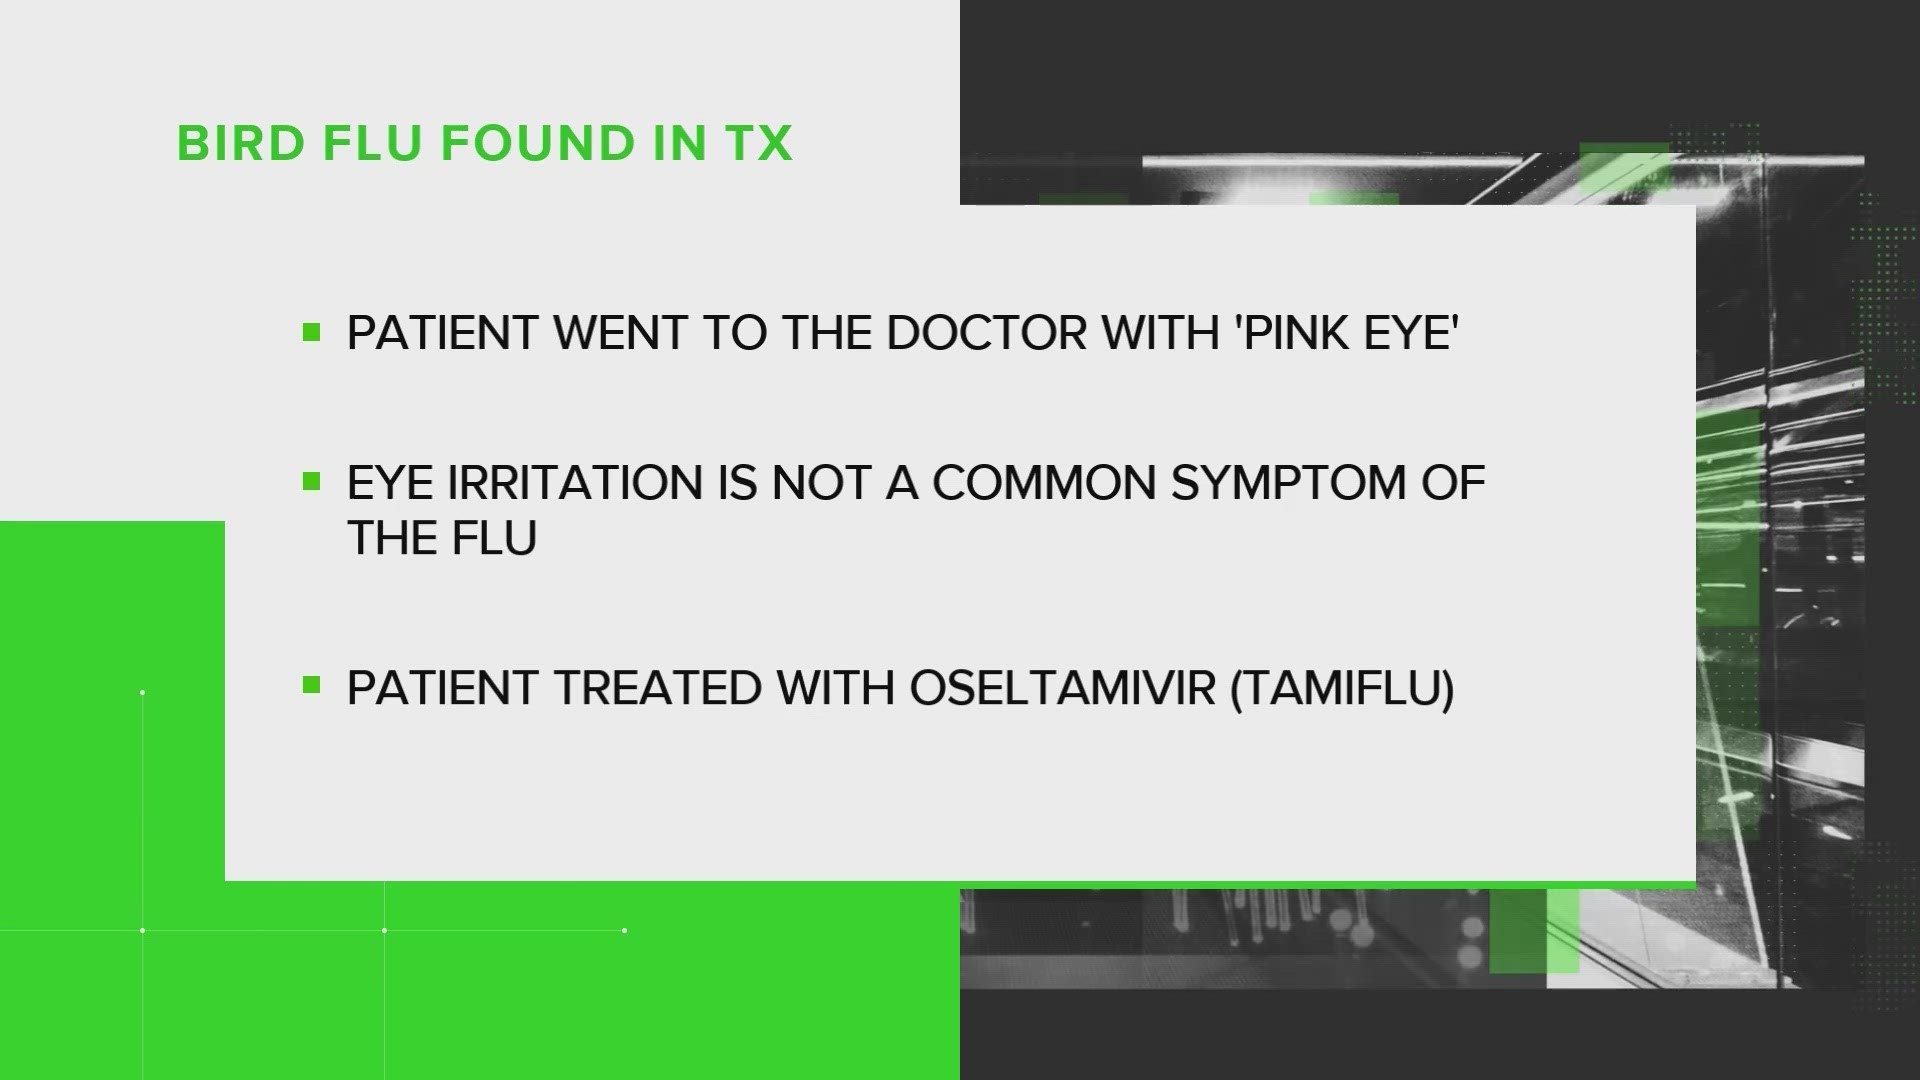 The Texas Department of State Health Services said the person contracted the bird flu after having direct exposure to an infected cow.